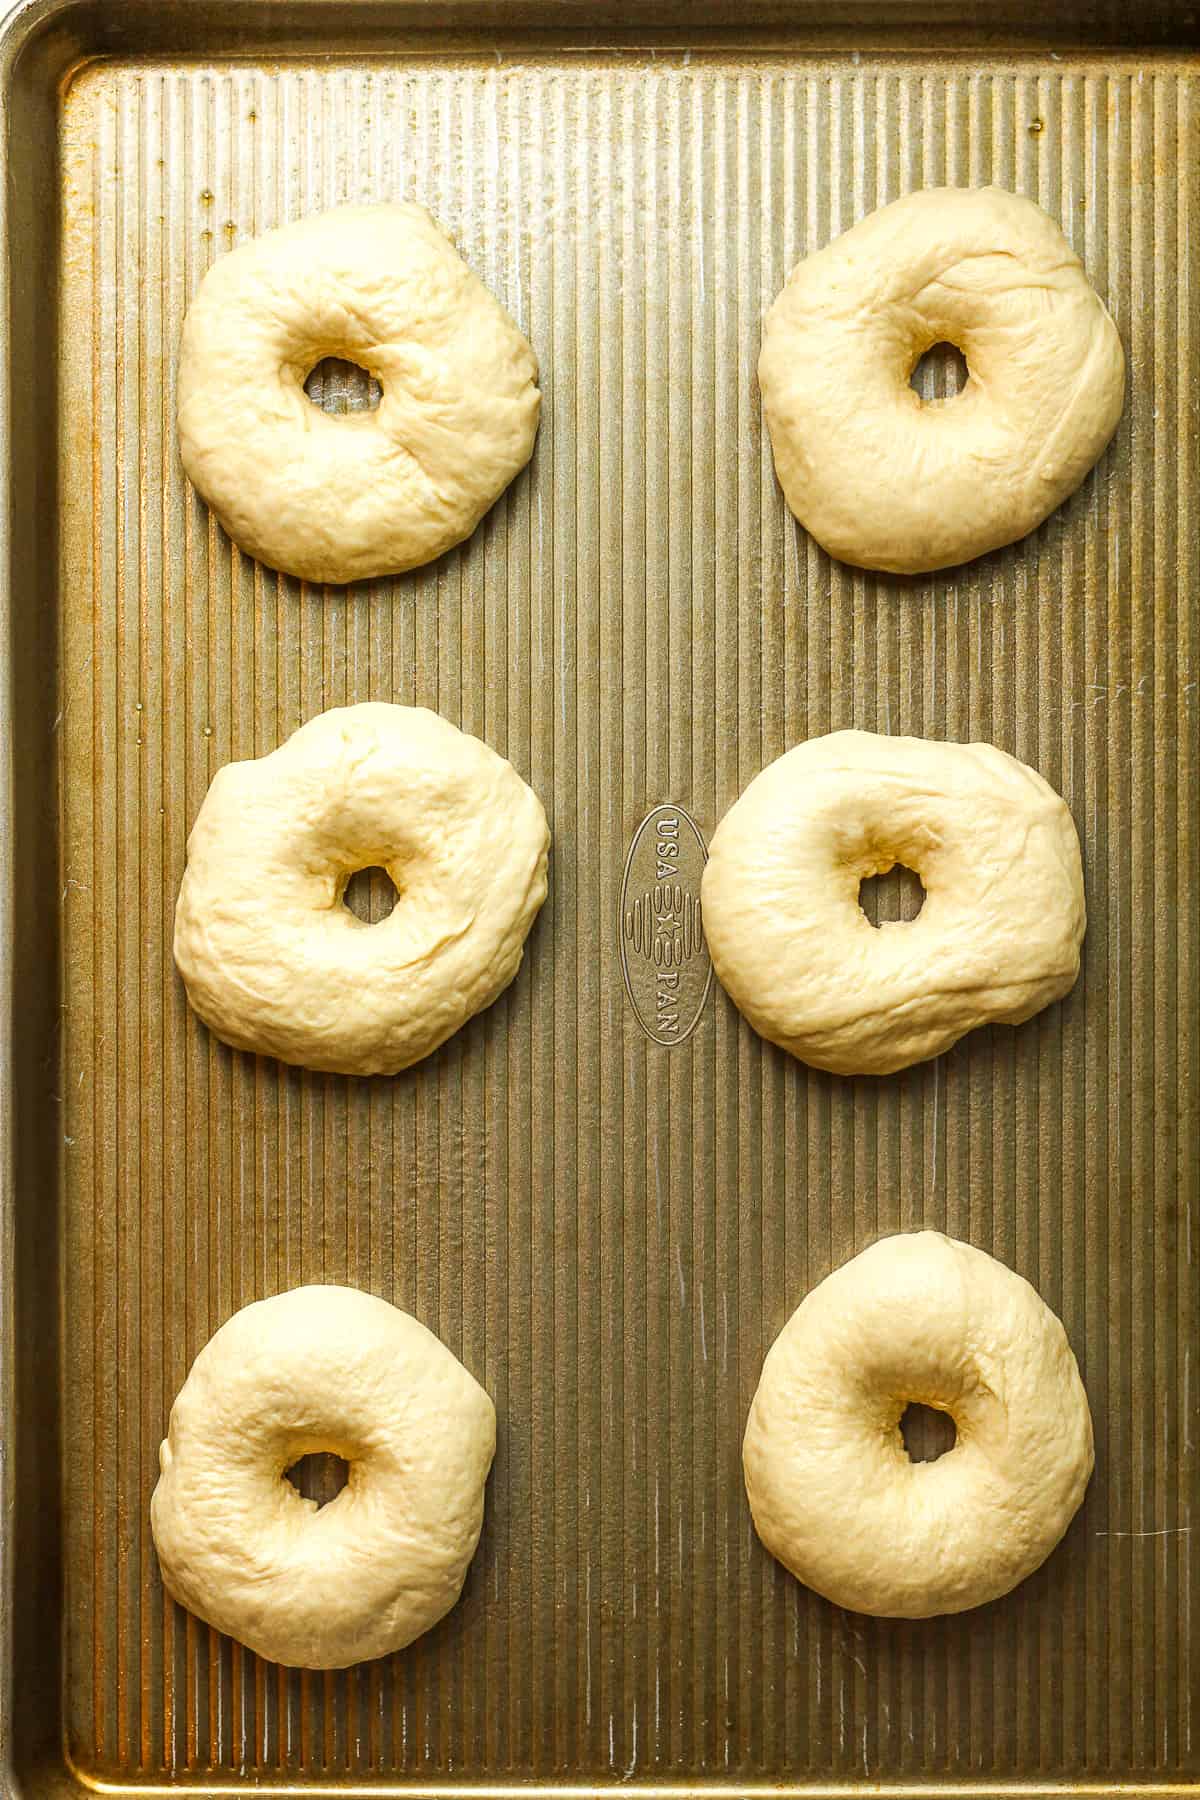 A baking sheet with the bagel shapes.